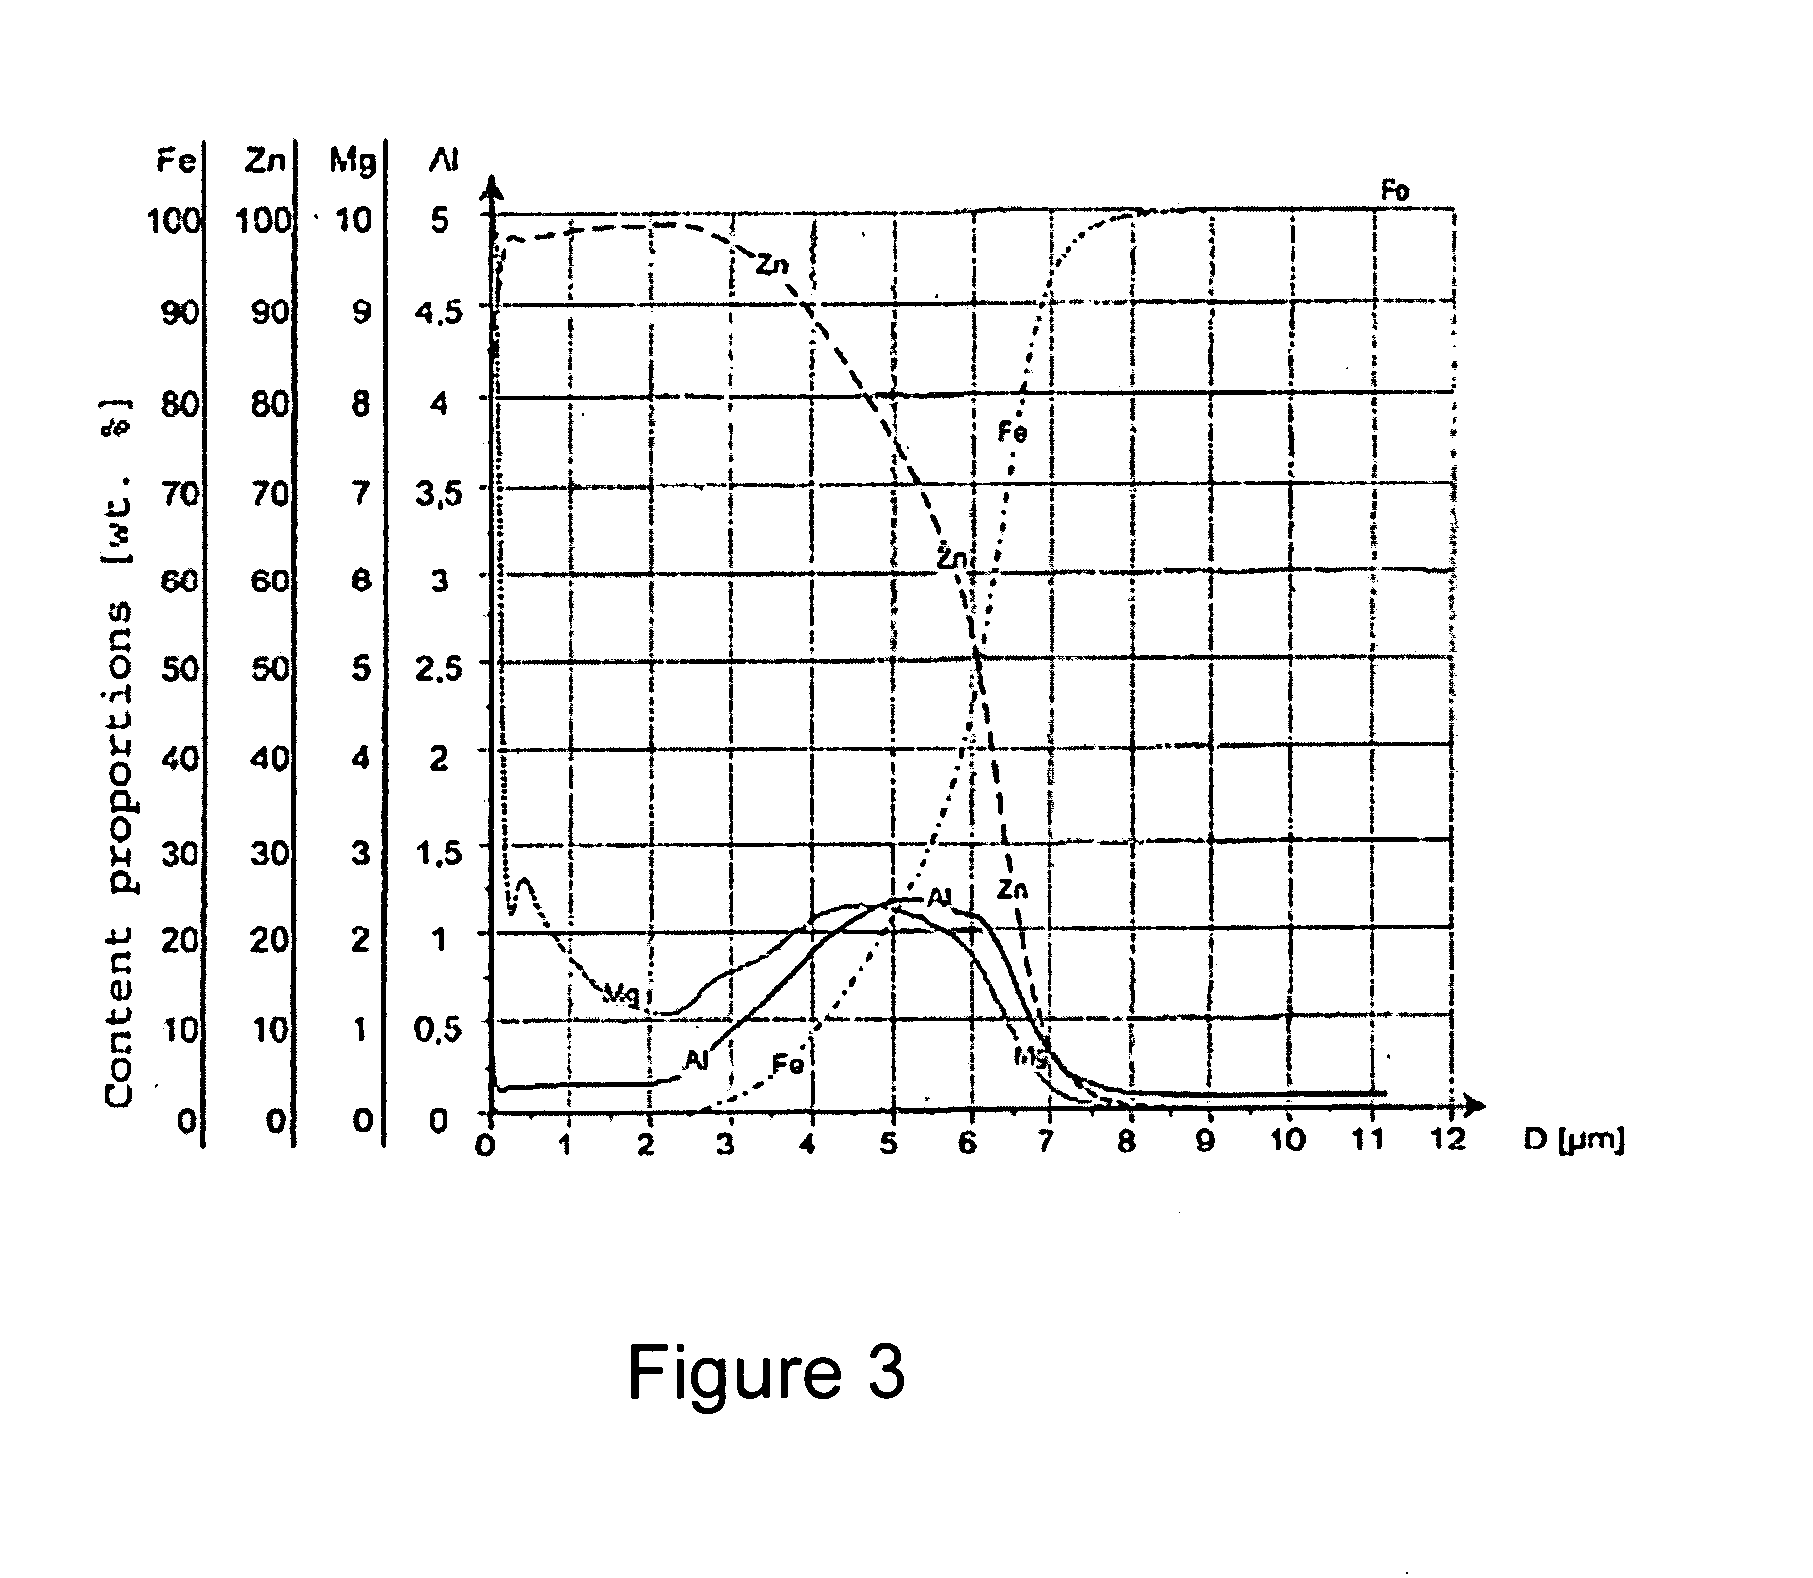 Process for Producing a Sheet Steel Product Coated with an Anticorrosion System